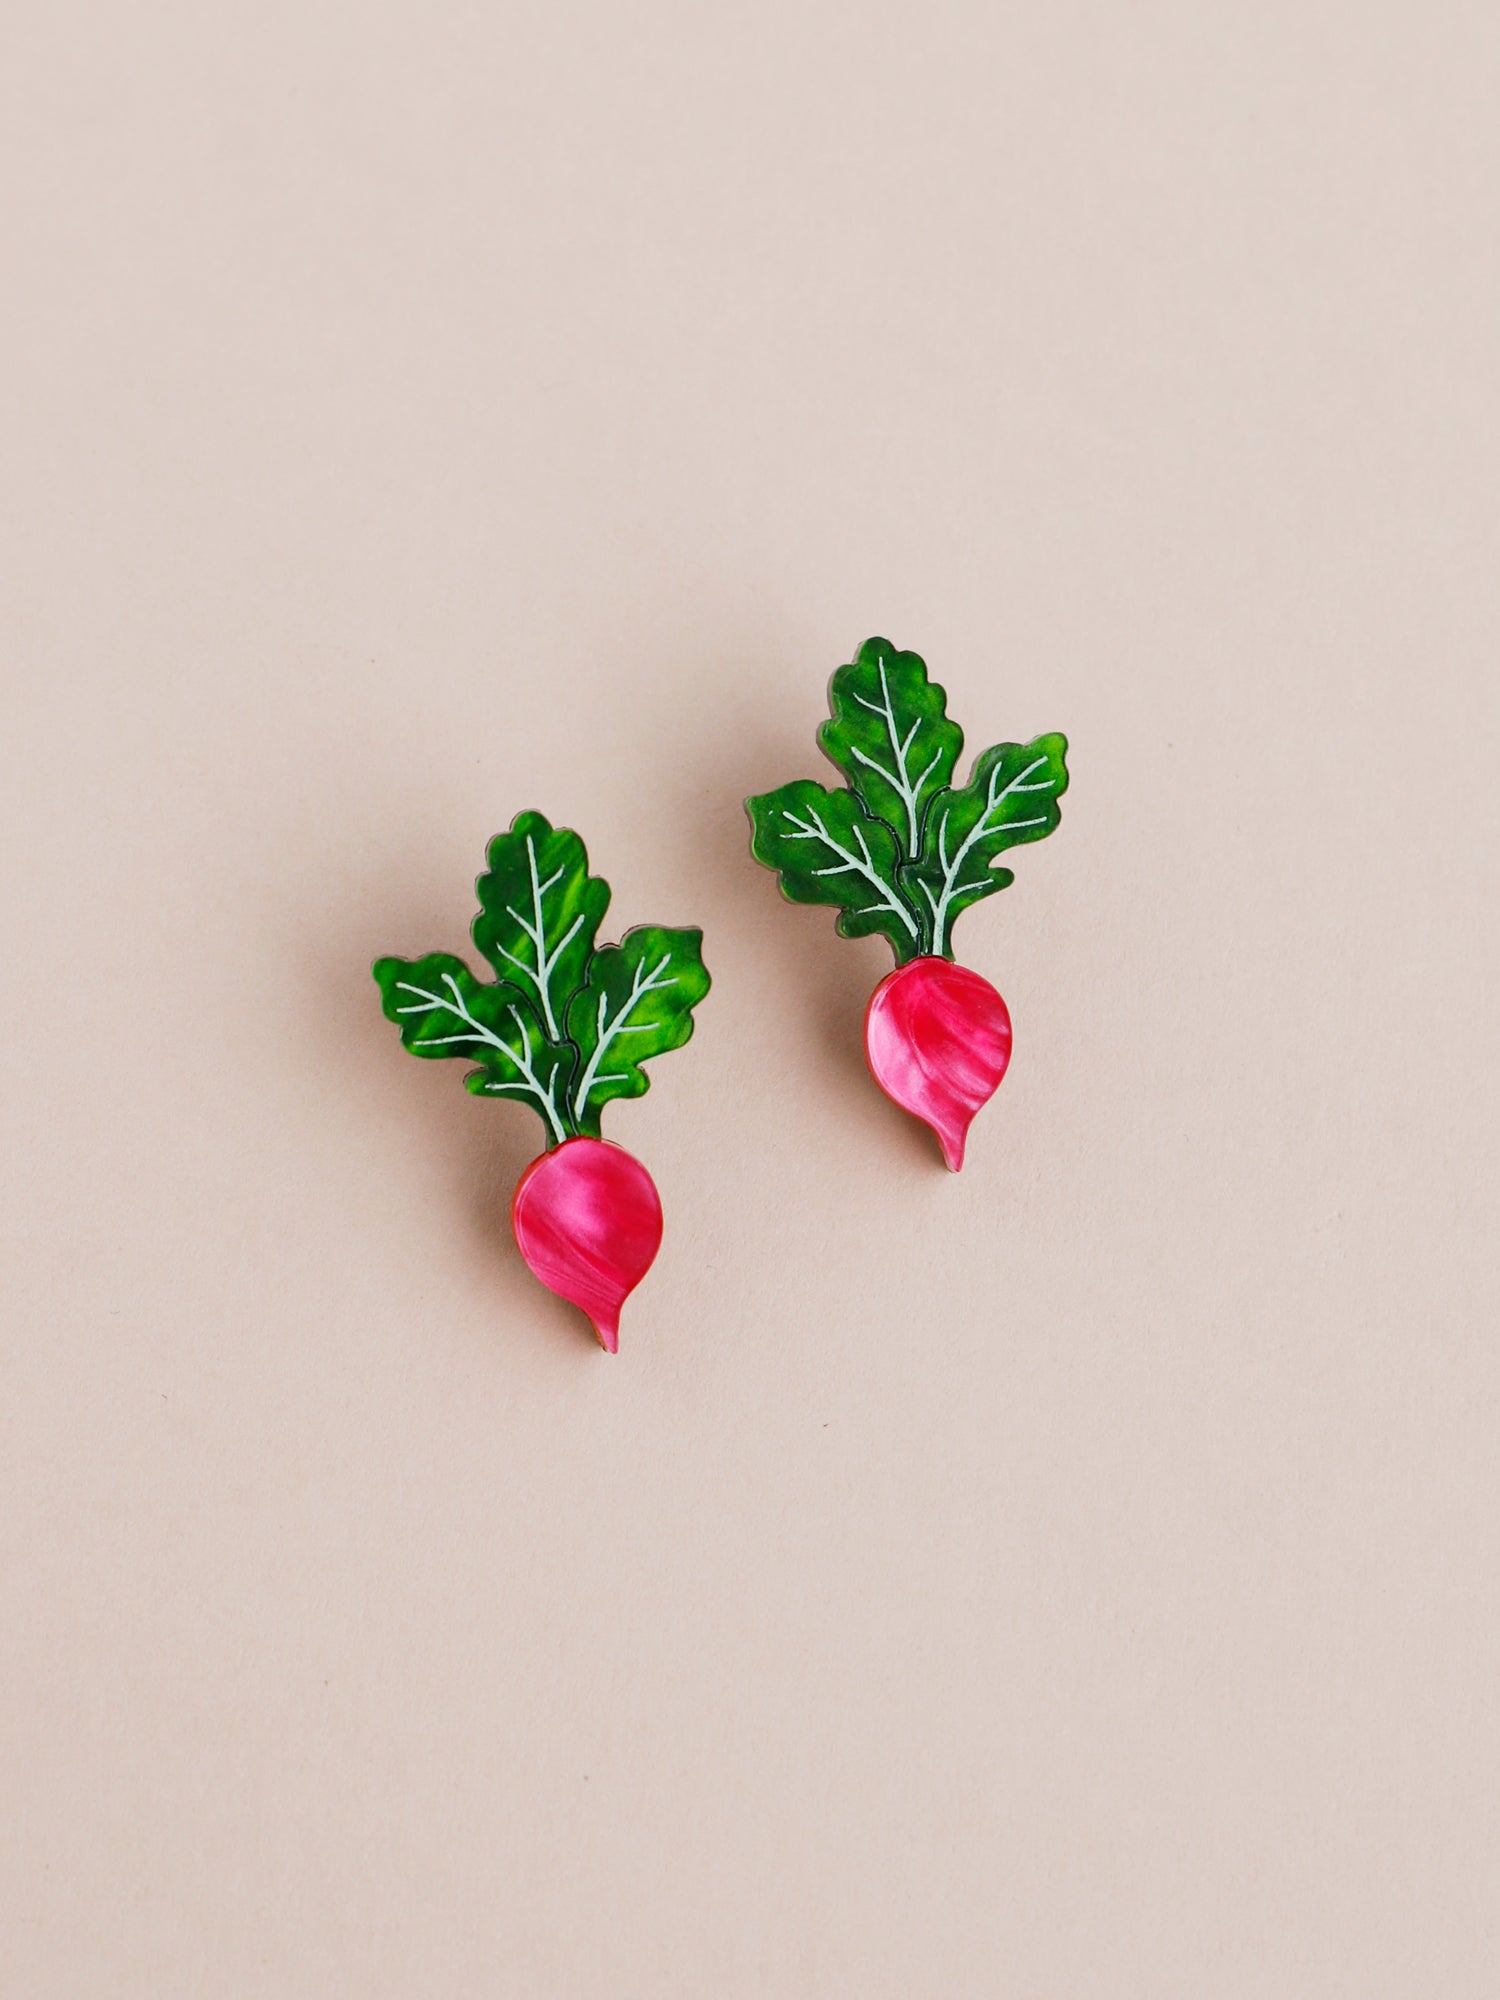 Pink and green acrylic mini radish stud earrings with silver clip on clasps. Handmade in London by Wolf & Moon.